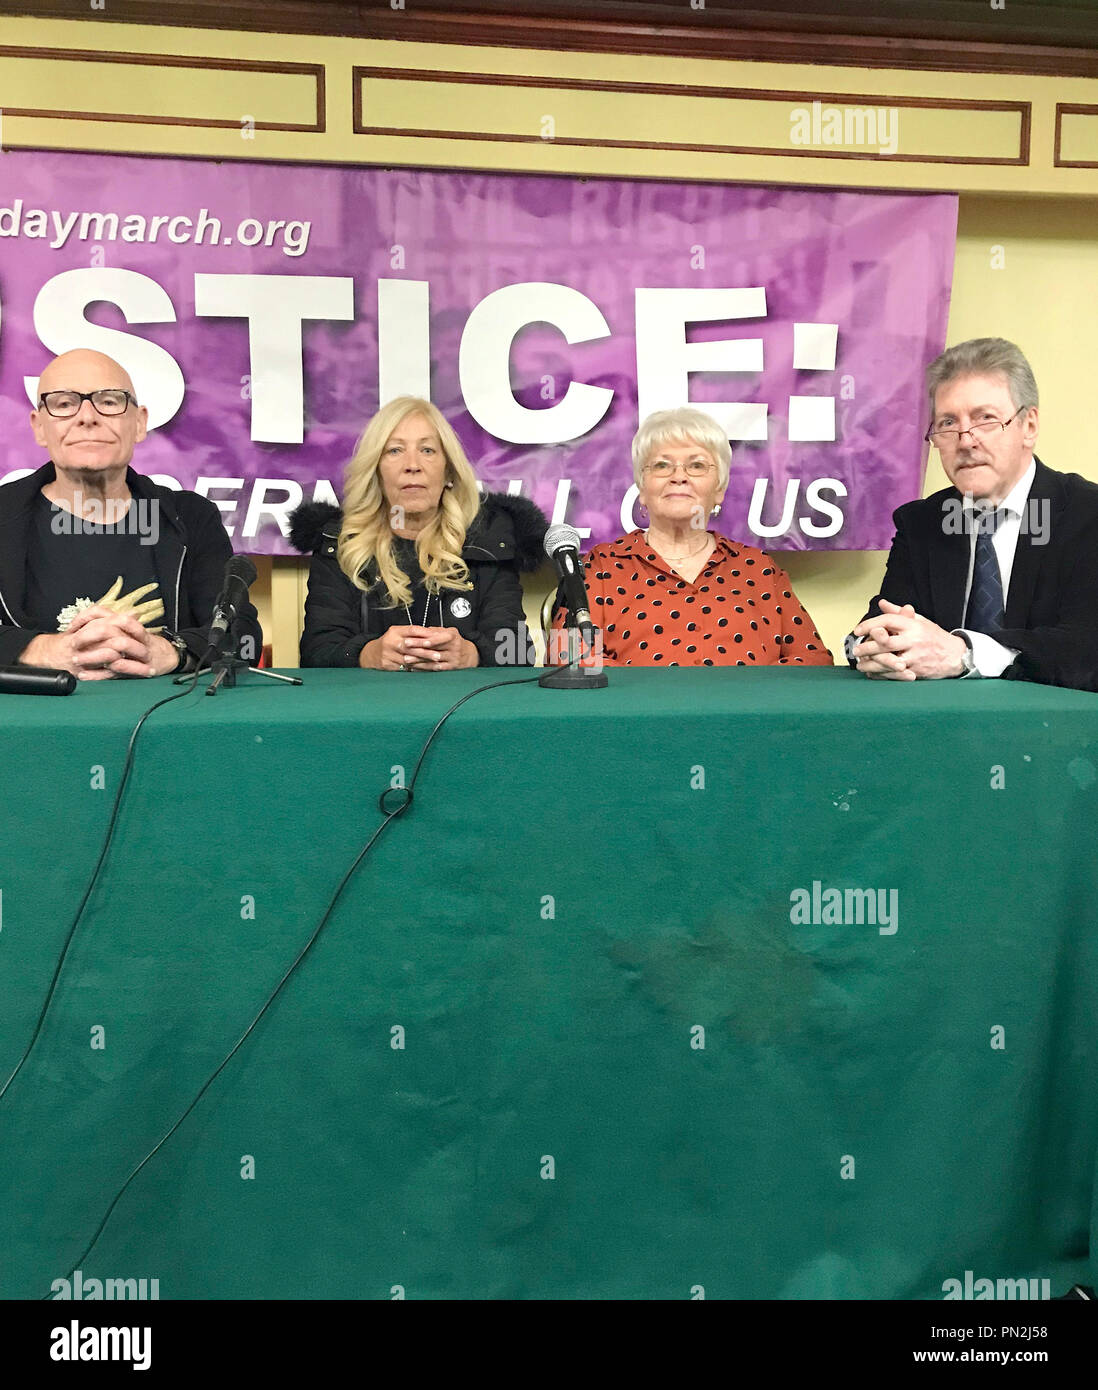 (Left to right) Antoinette Keegan, Kate Nash, Stephen Travers and Eamonn McCann at the public event in Dublin on Wednesday in which the group call for support from the people of the Republic of Ireland in the quest for justice. Stock Photo